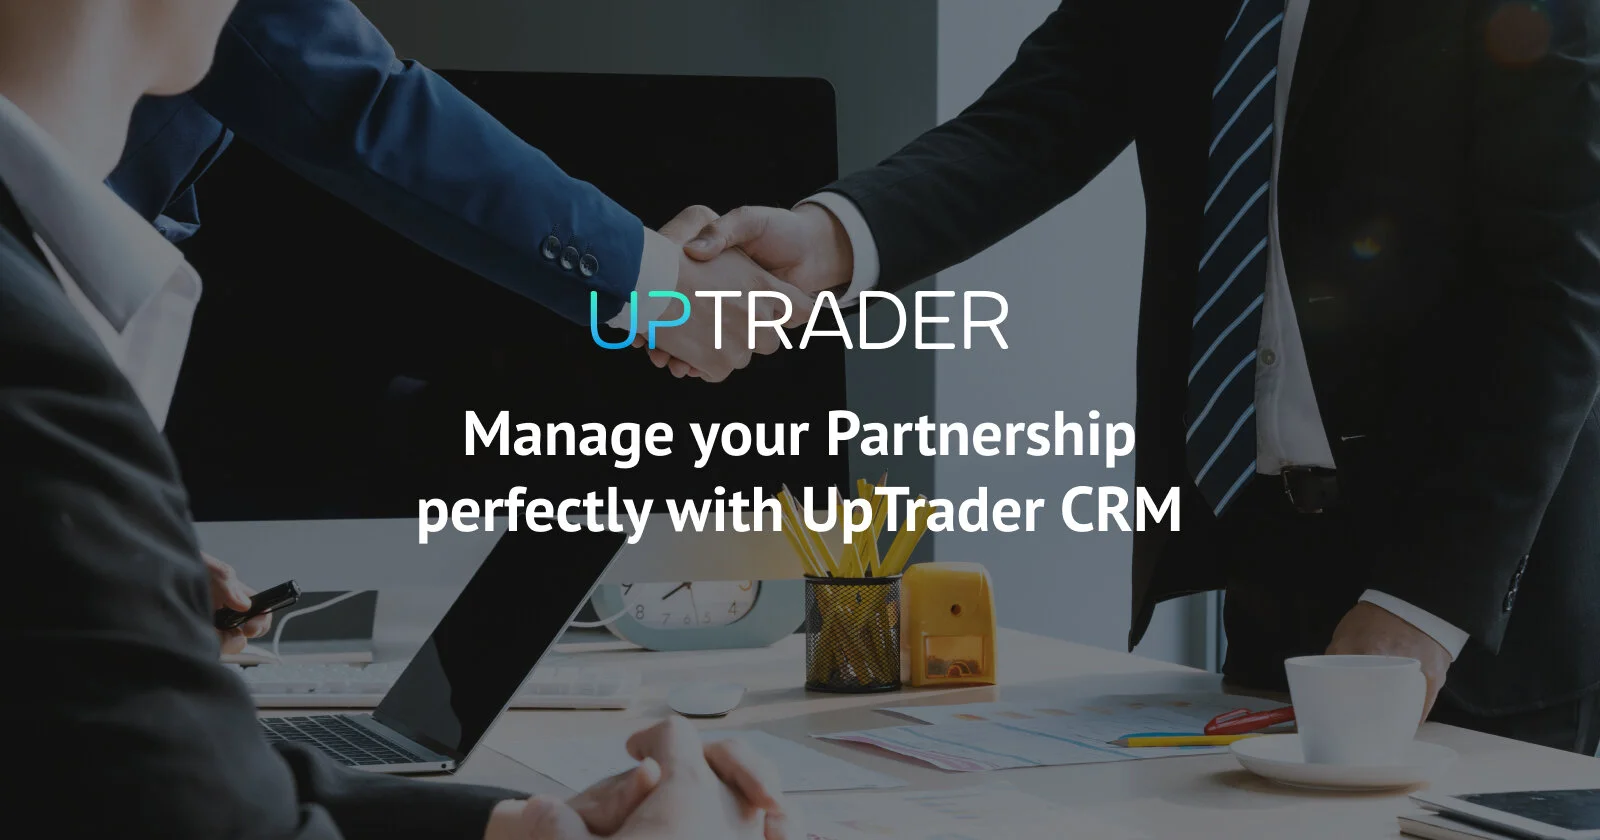 Manage your Partnership perfectly with UpTrader CRM